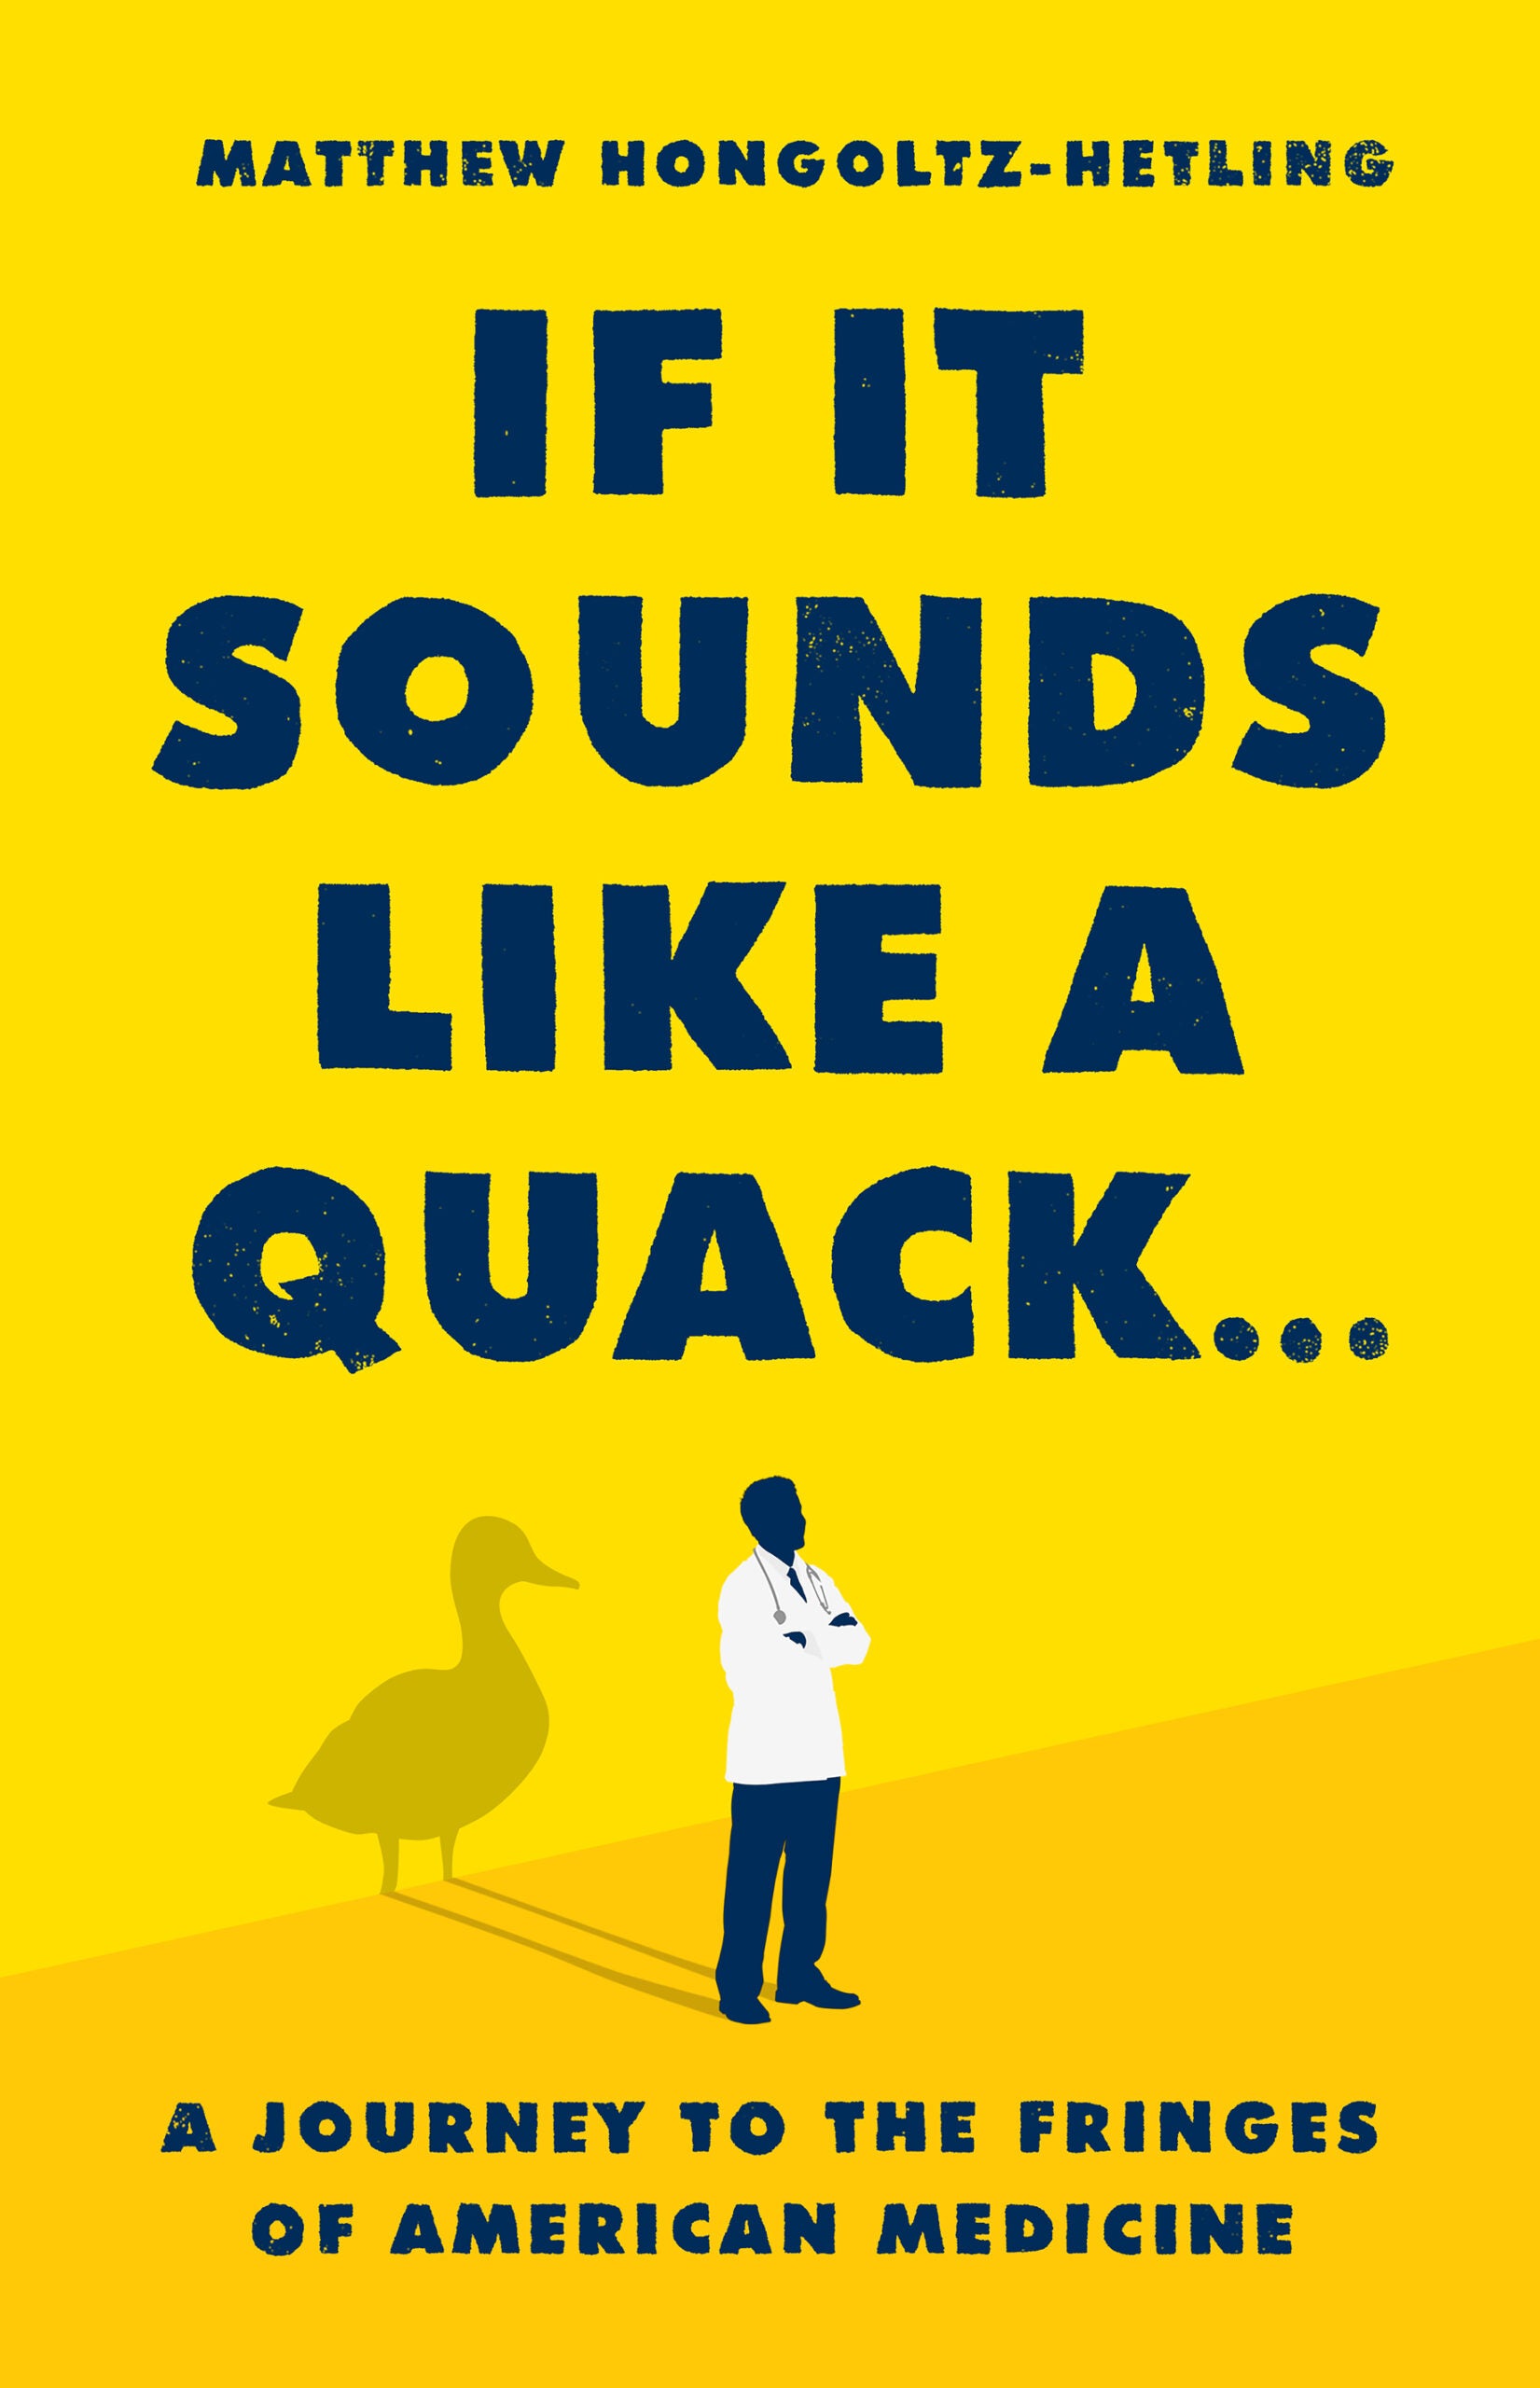 If It Sounds Like a Quack book cover with doctor and silhouette of a duck on bright yellow with navy all-caps text